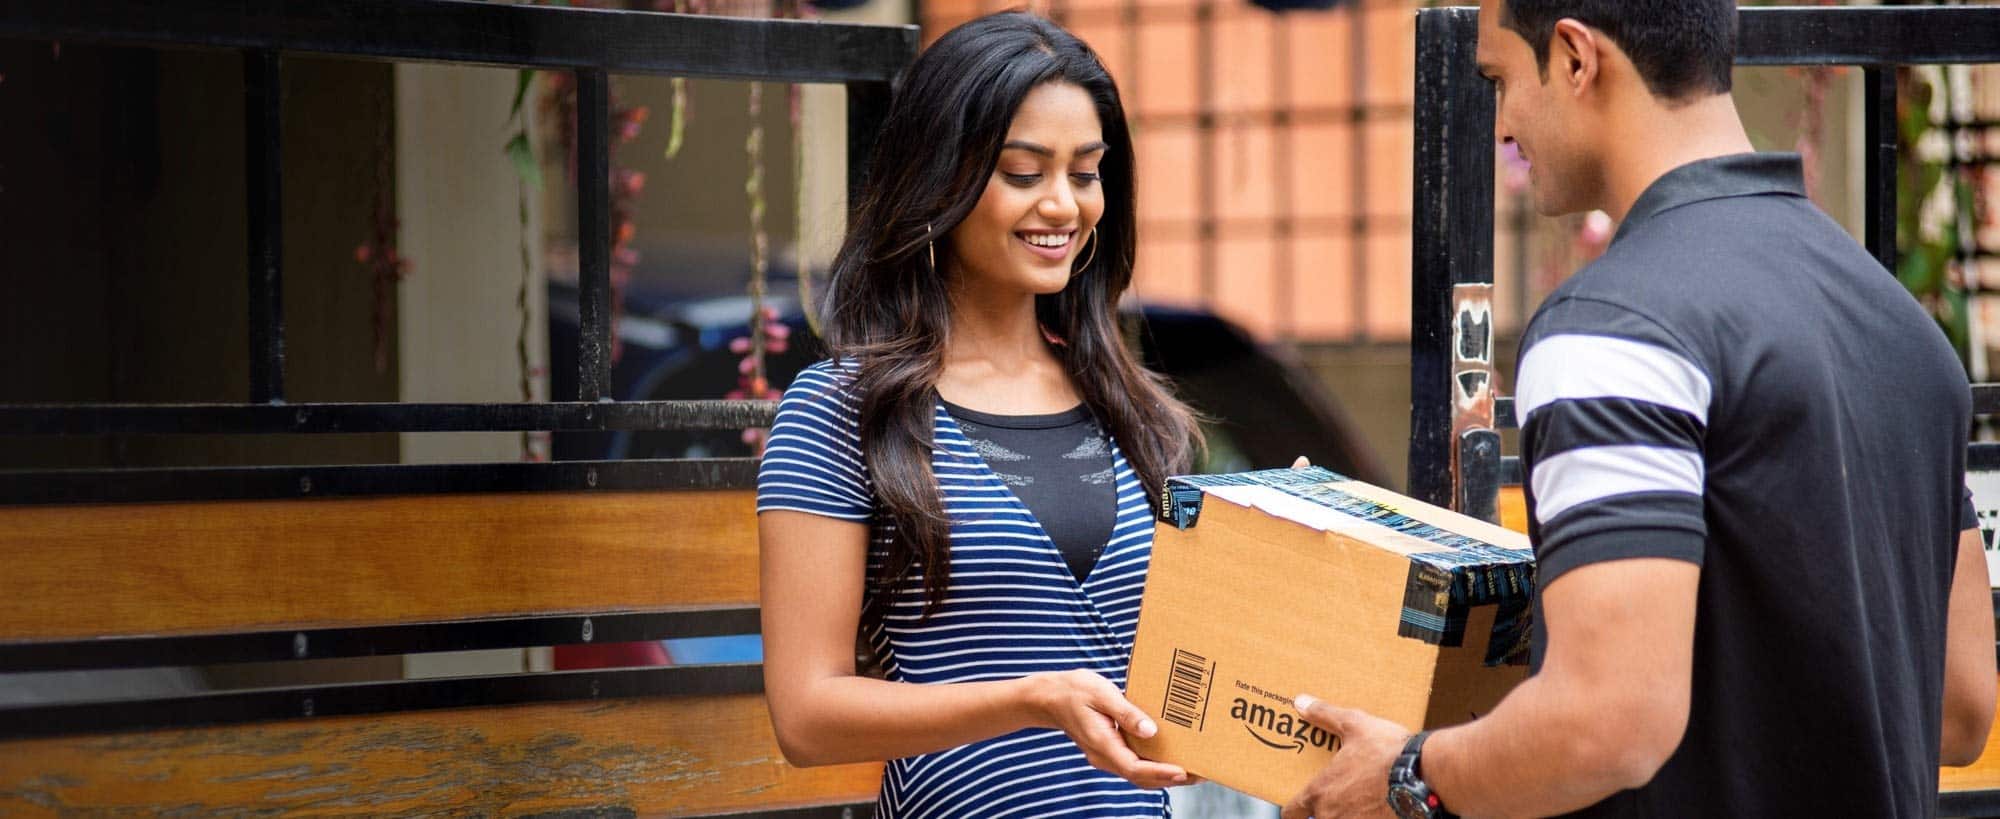 Amazon Flex Will Let You Make Extra Money Delivering Packages for Amazon India Part Time 3